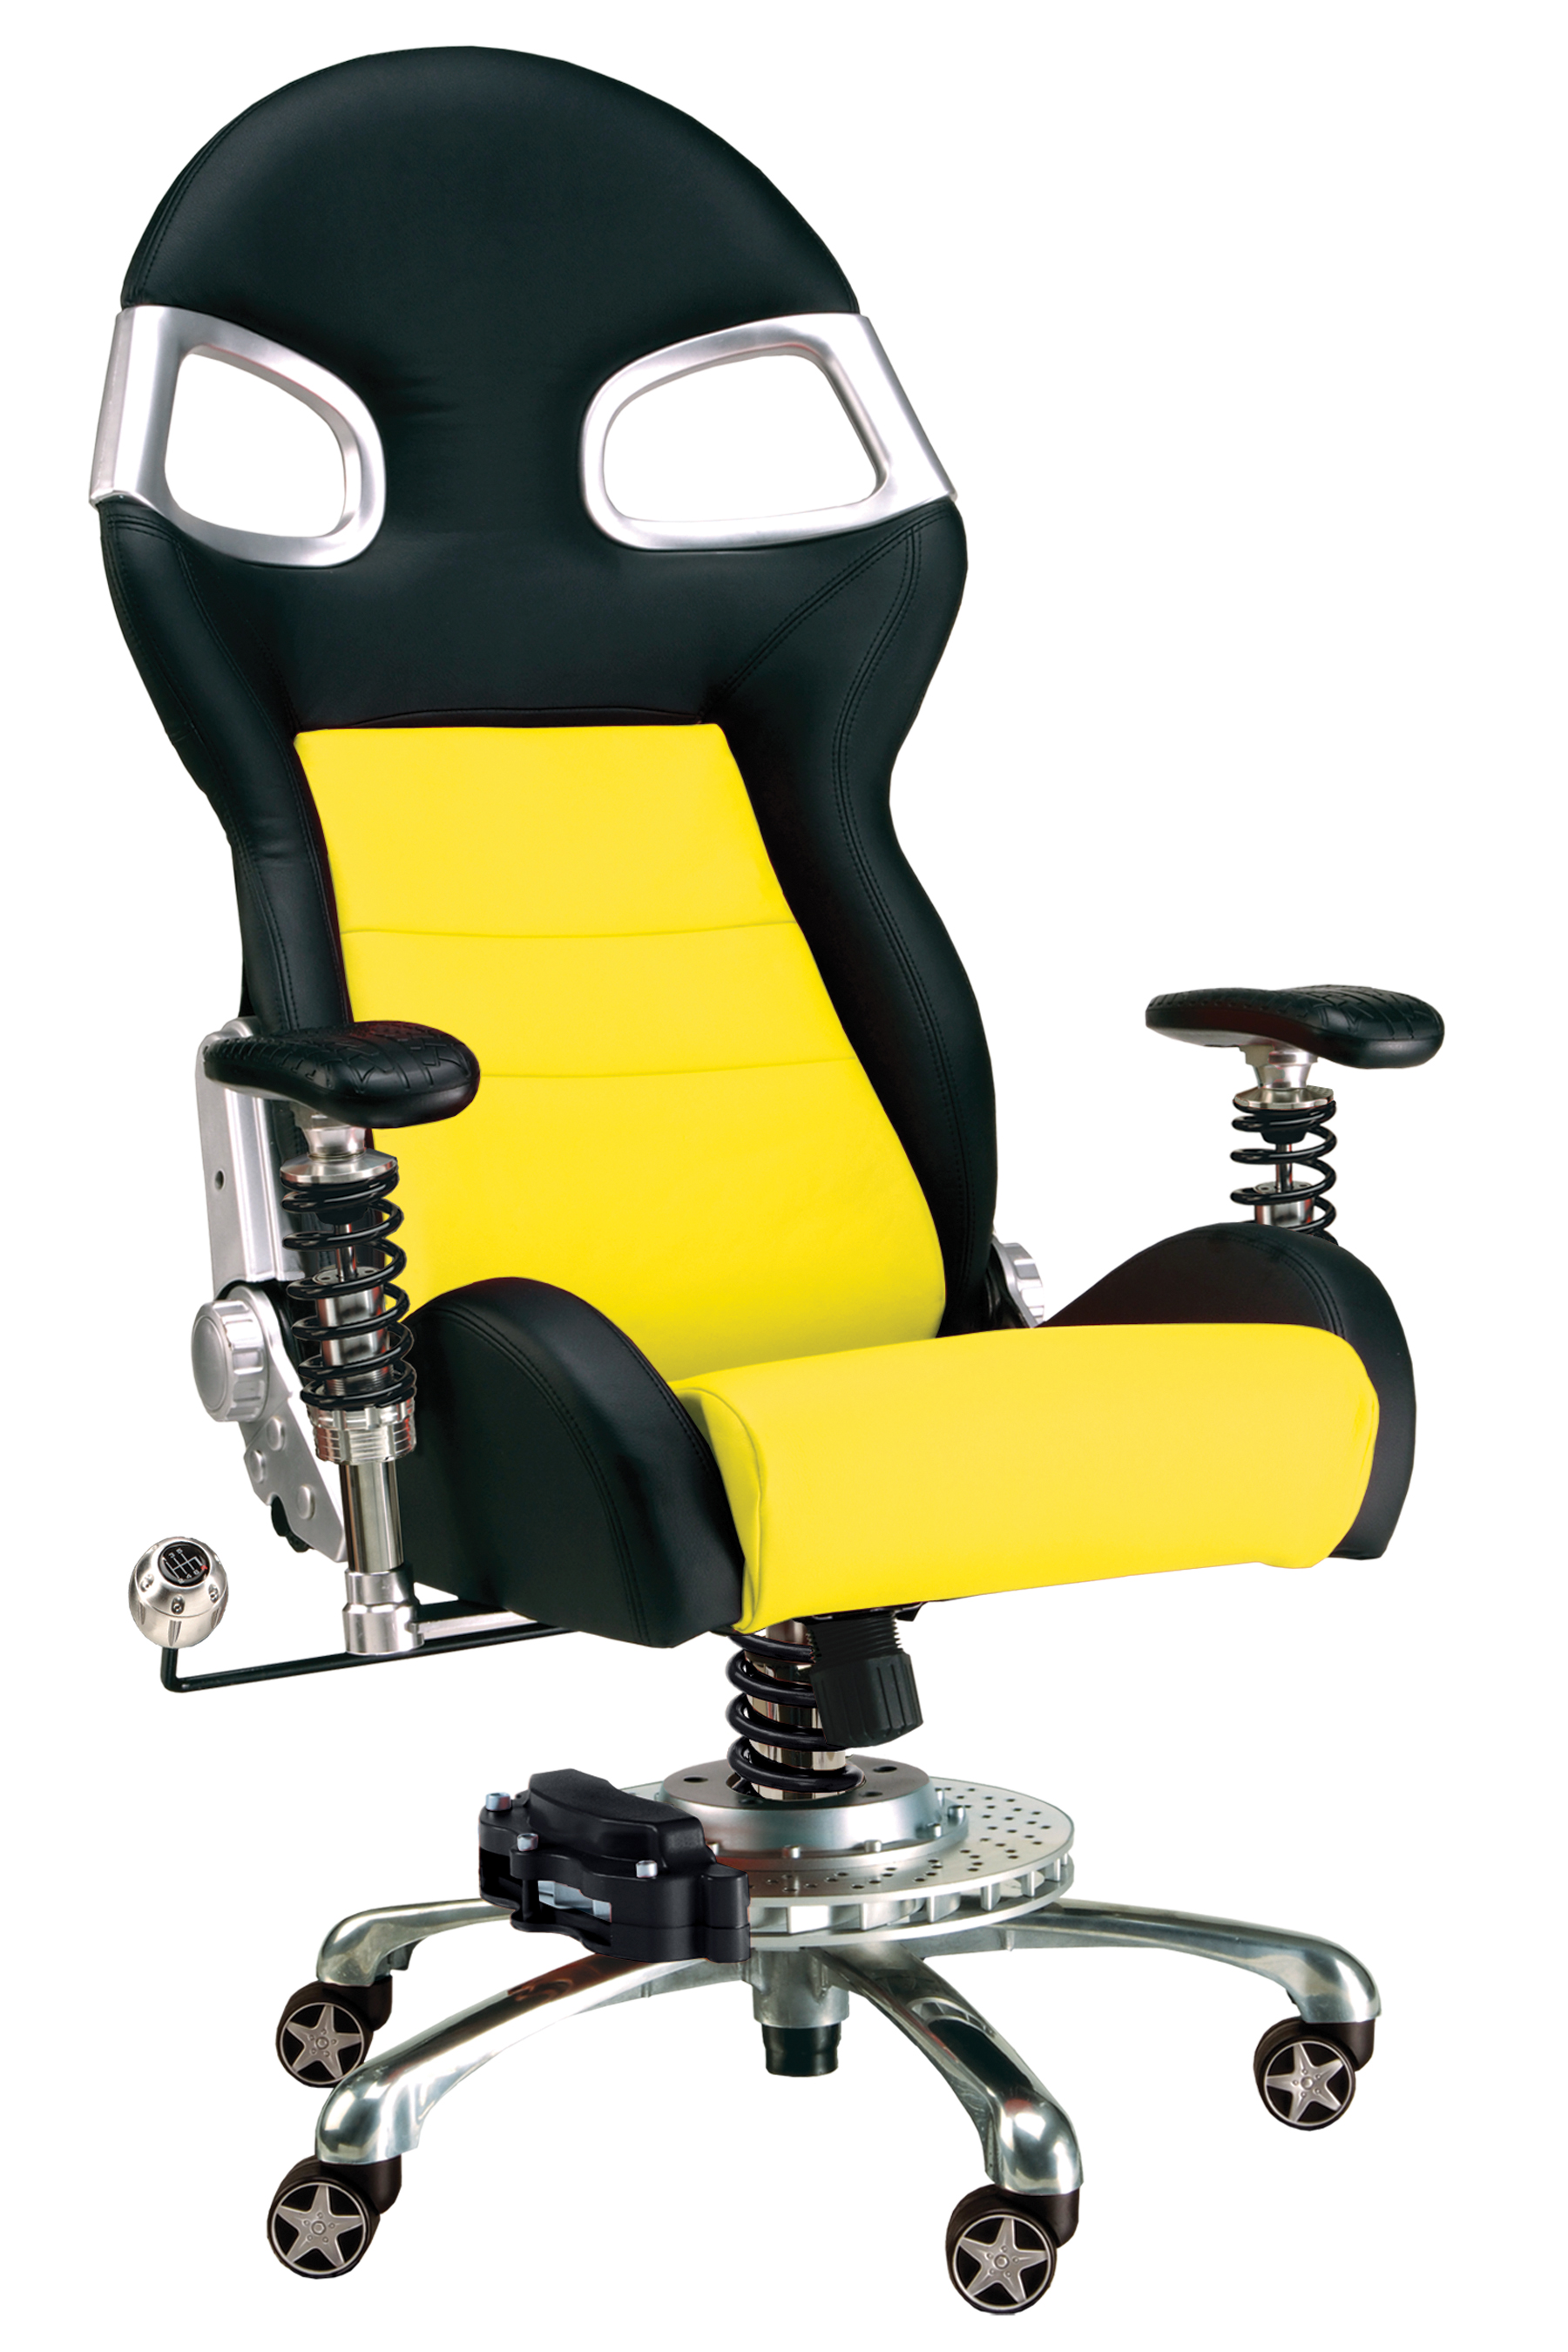 Intro-Tech Automotive, Pitstop Furniture, F08000Y LXE Chair Yellow, Desk Chair